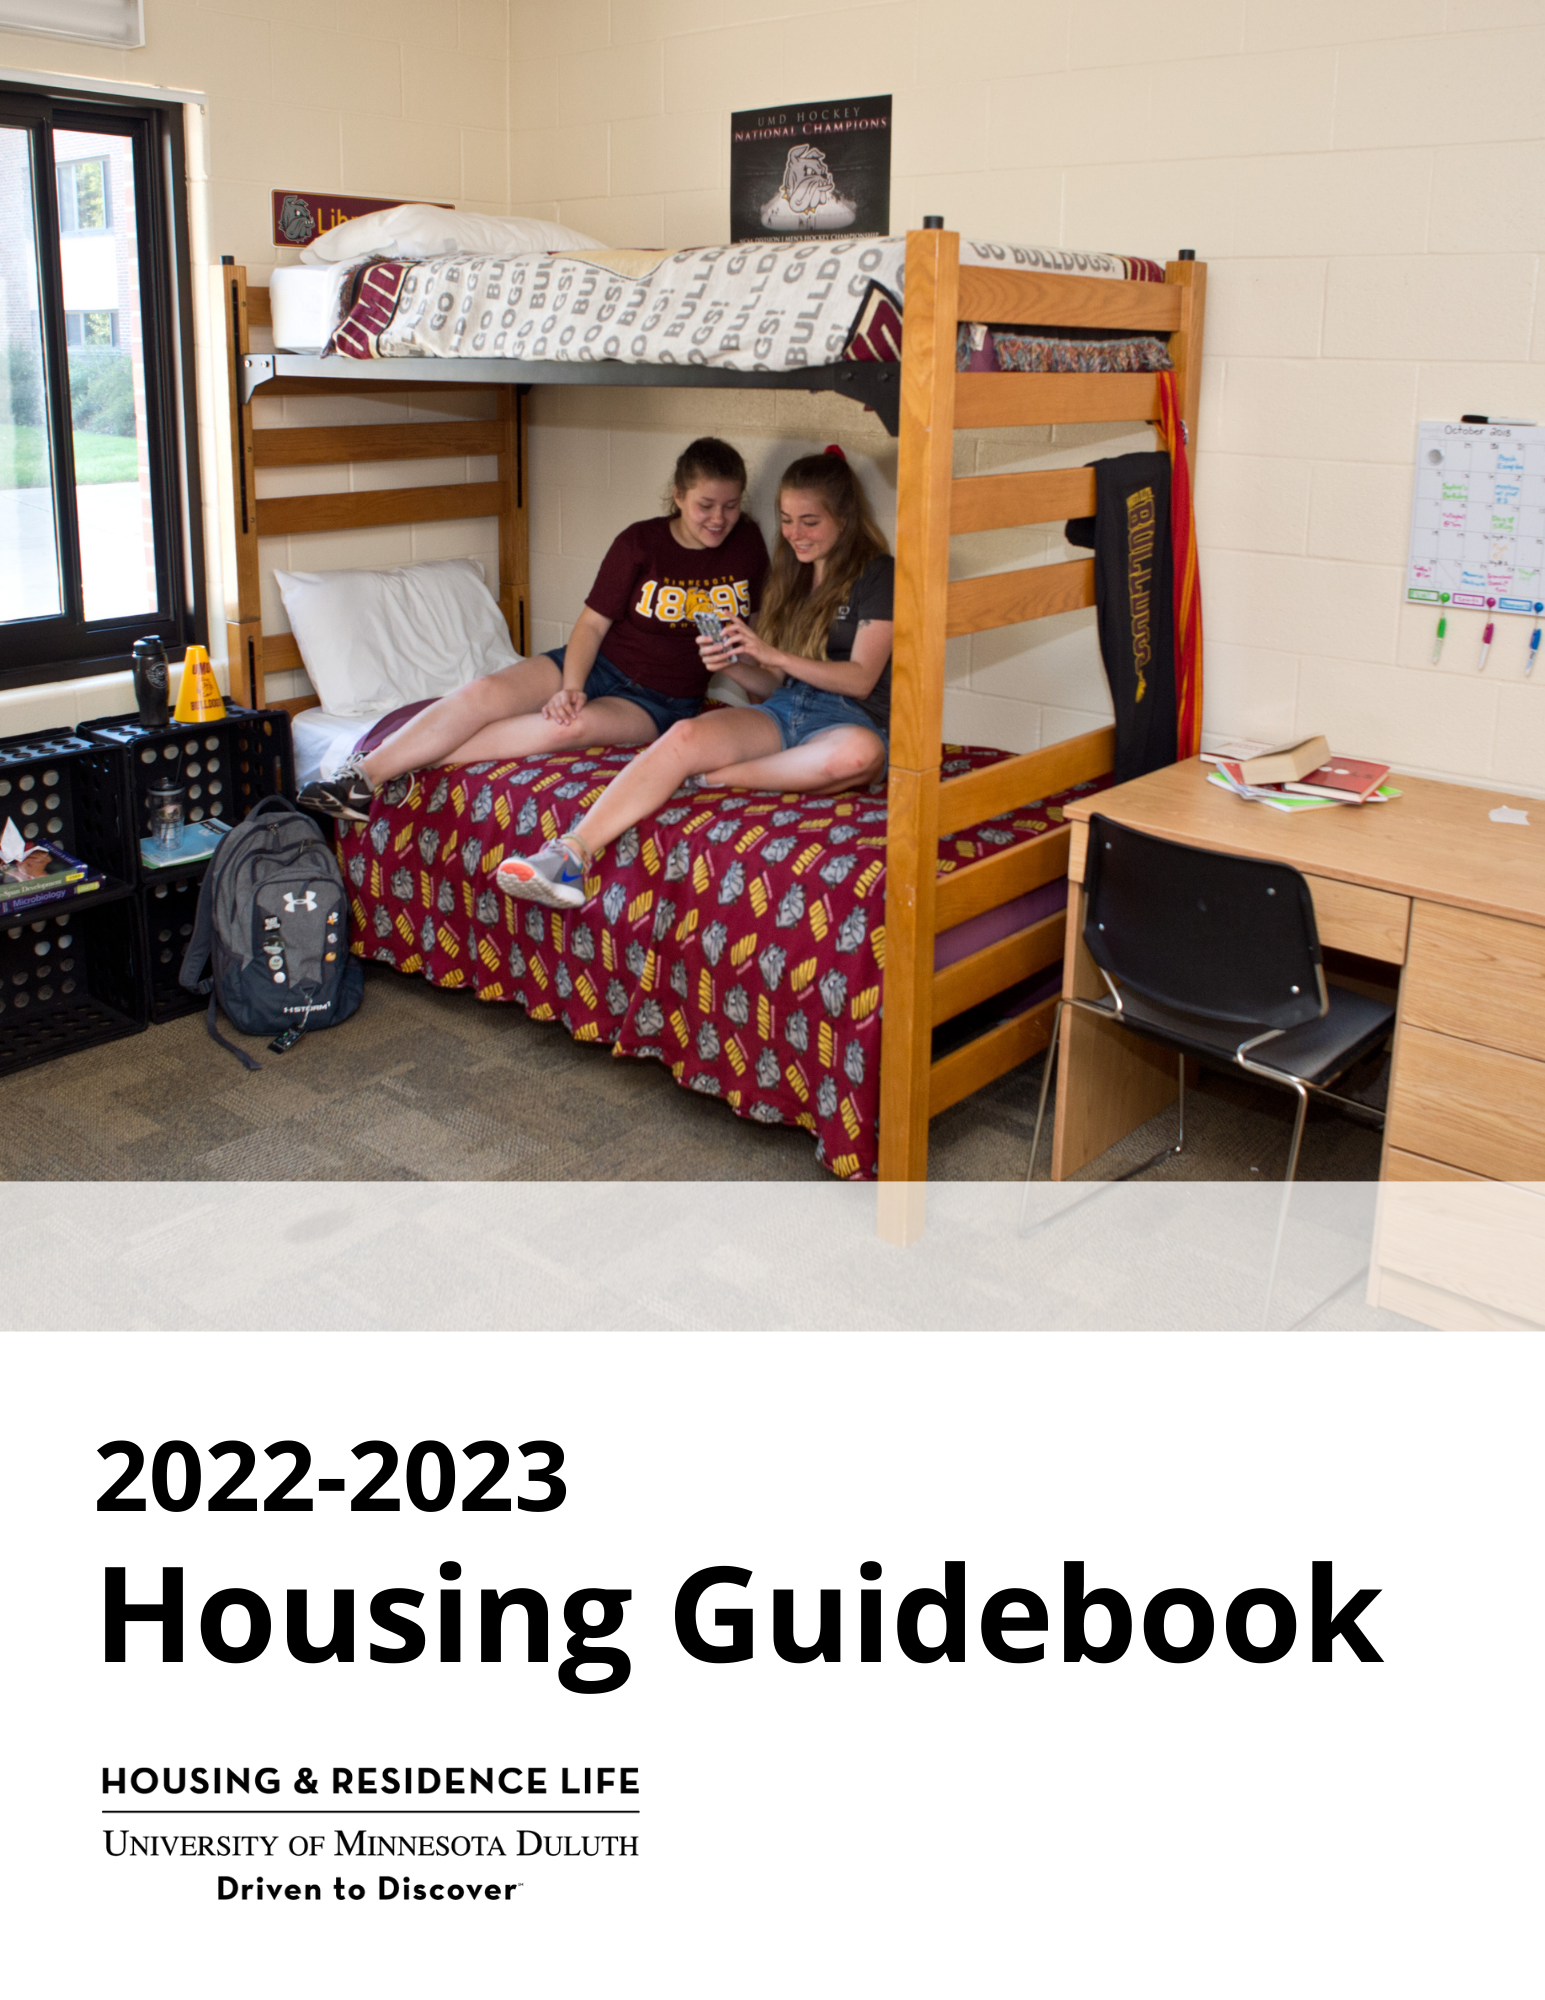 cover of UMD 2022-2023 Housing Guidebook, image shows two students in UMD shirts sitting on a lofted bed looking at a phone